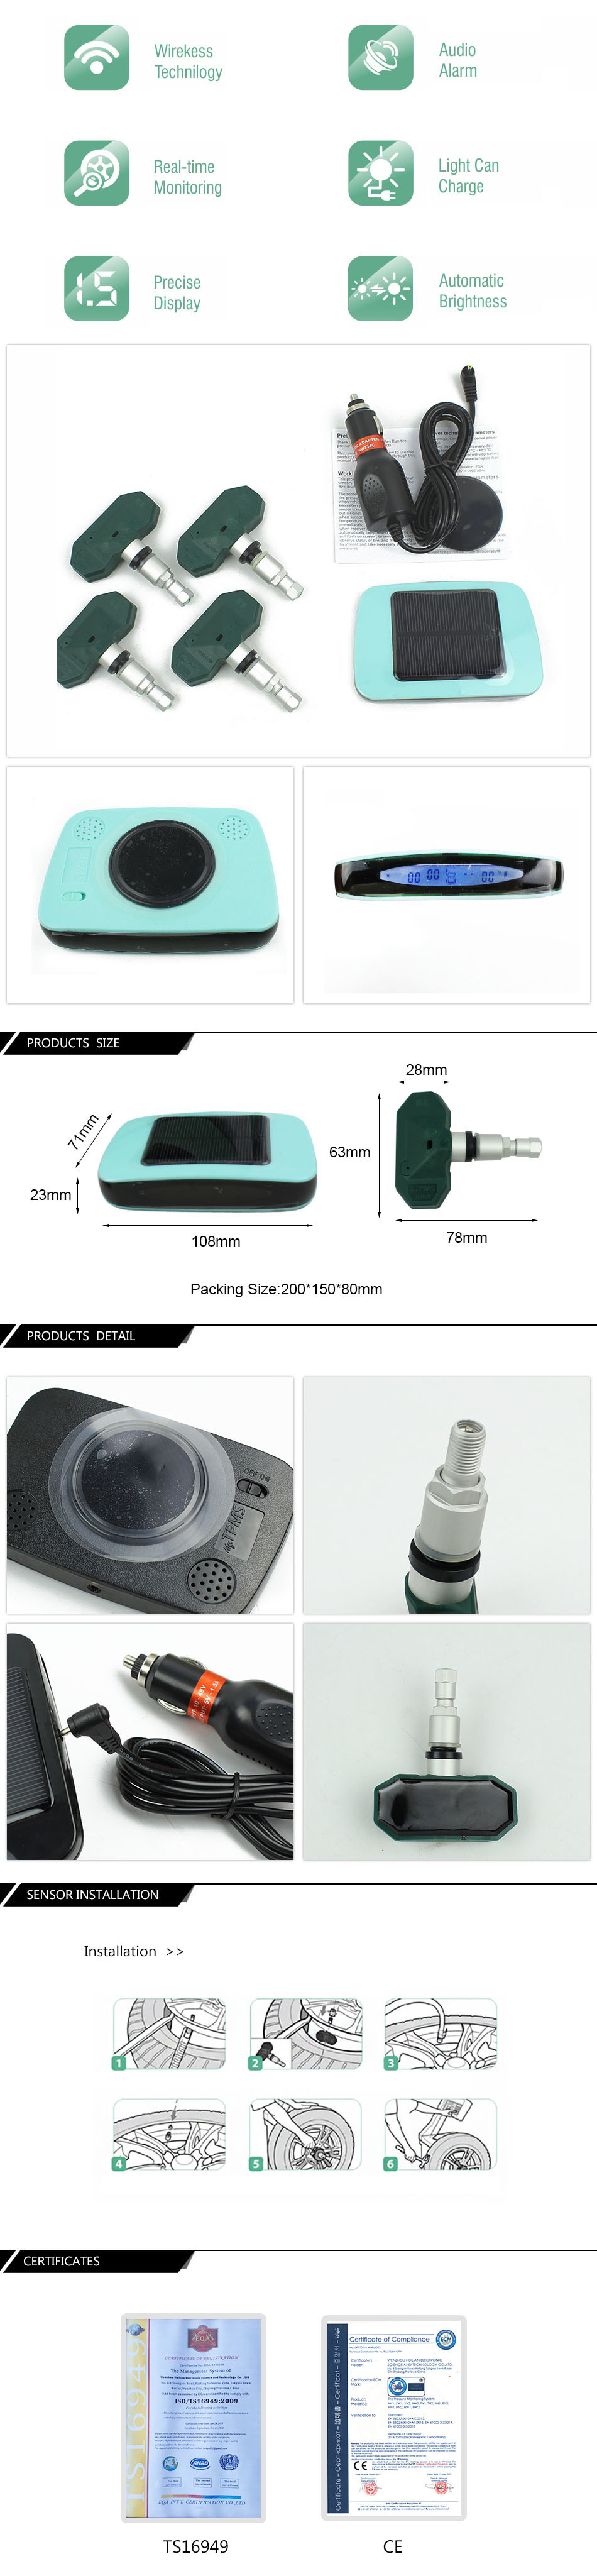 FE-TPMS-B01 Wireless Hot Selling Tire Pressure Monitoring System and Tire Pressure Safety for Car